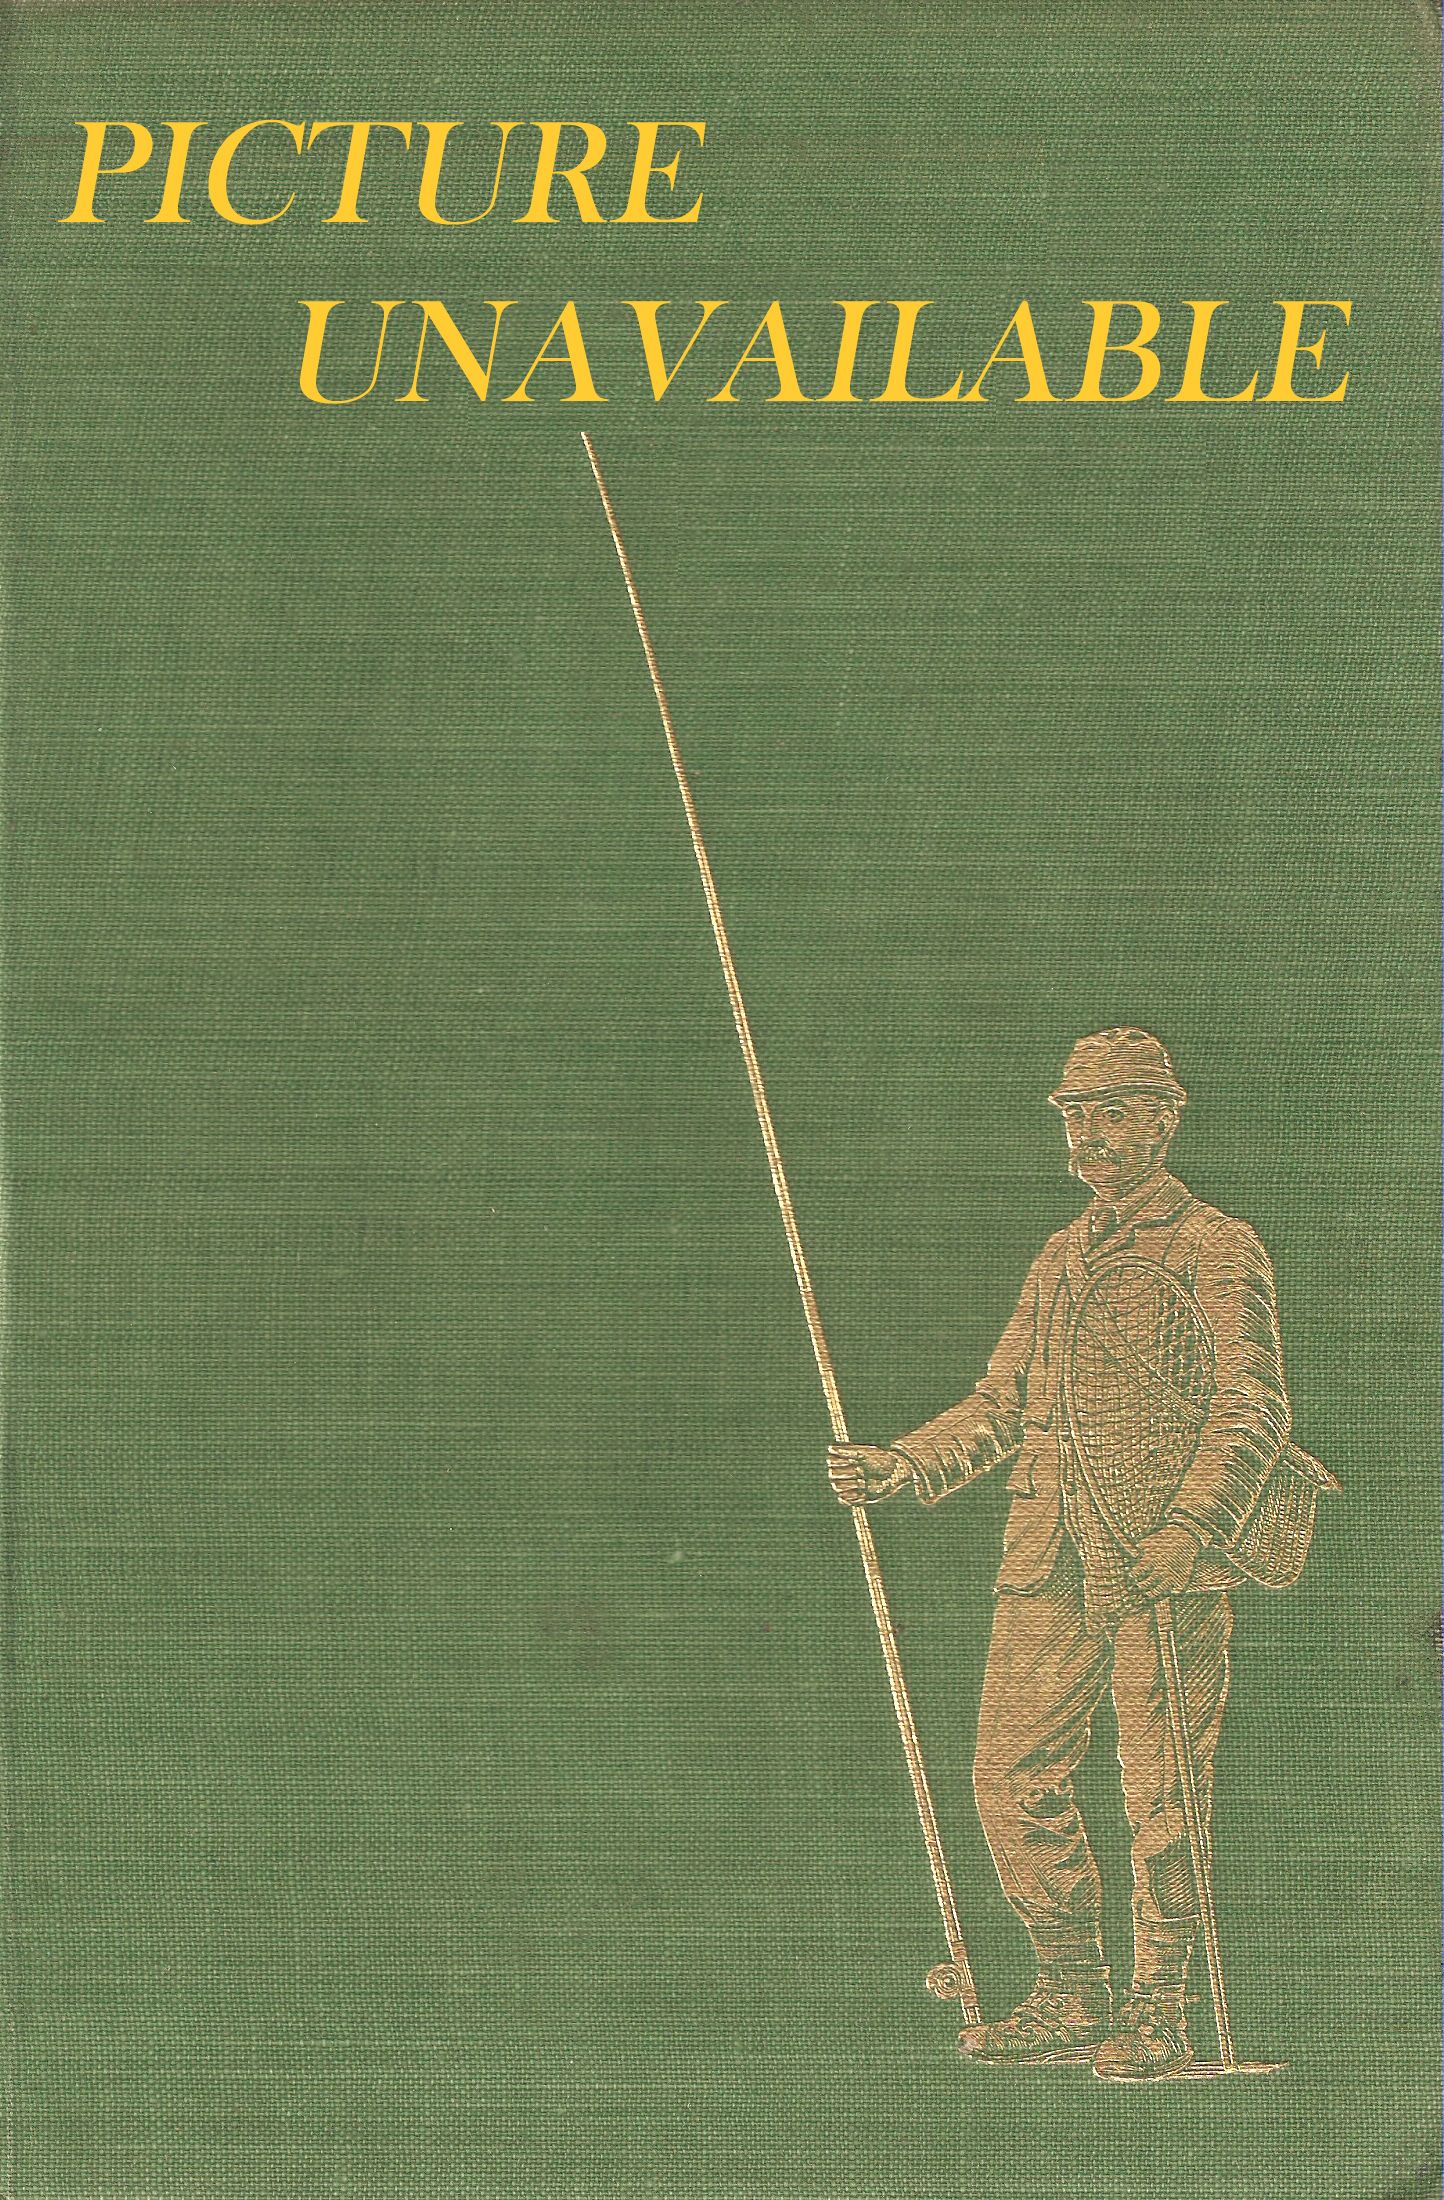 ZANE GREY ON FISHING. By Zane Grey. Edited and with an introduction by  Terry Mort. Foreword by Loren Grey.